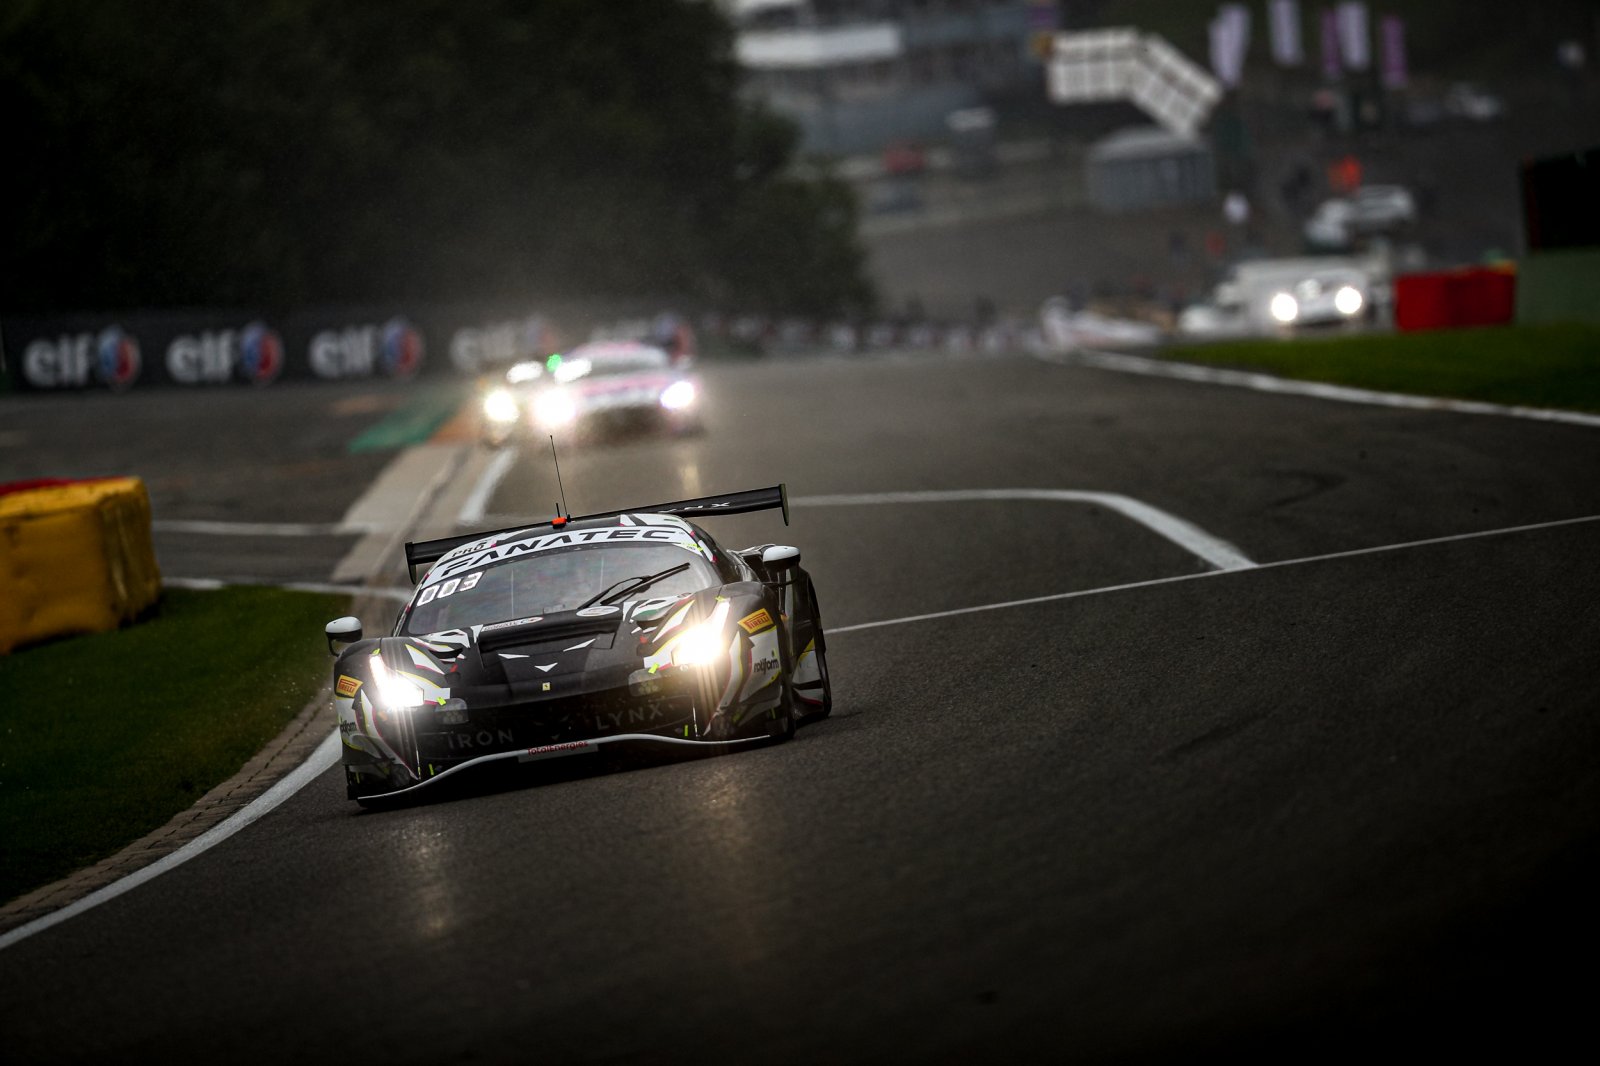 Iron Lynx Ferrari leads TotalEnergies 24 Hours of Spa at one-quarter distance as darkness falls over the Ardennes